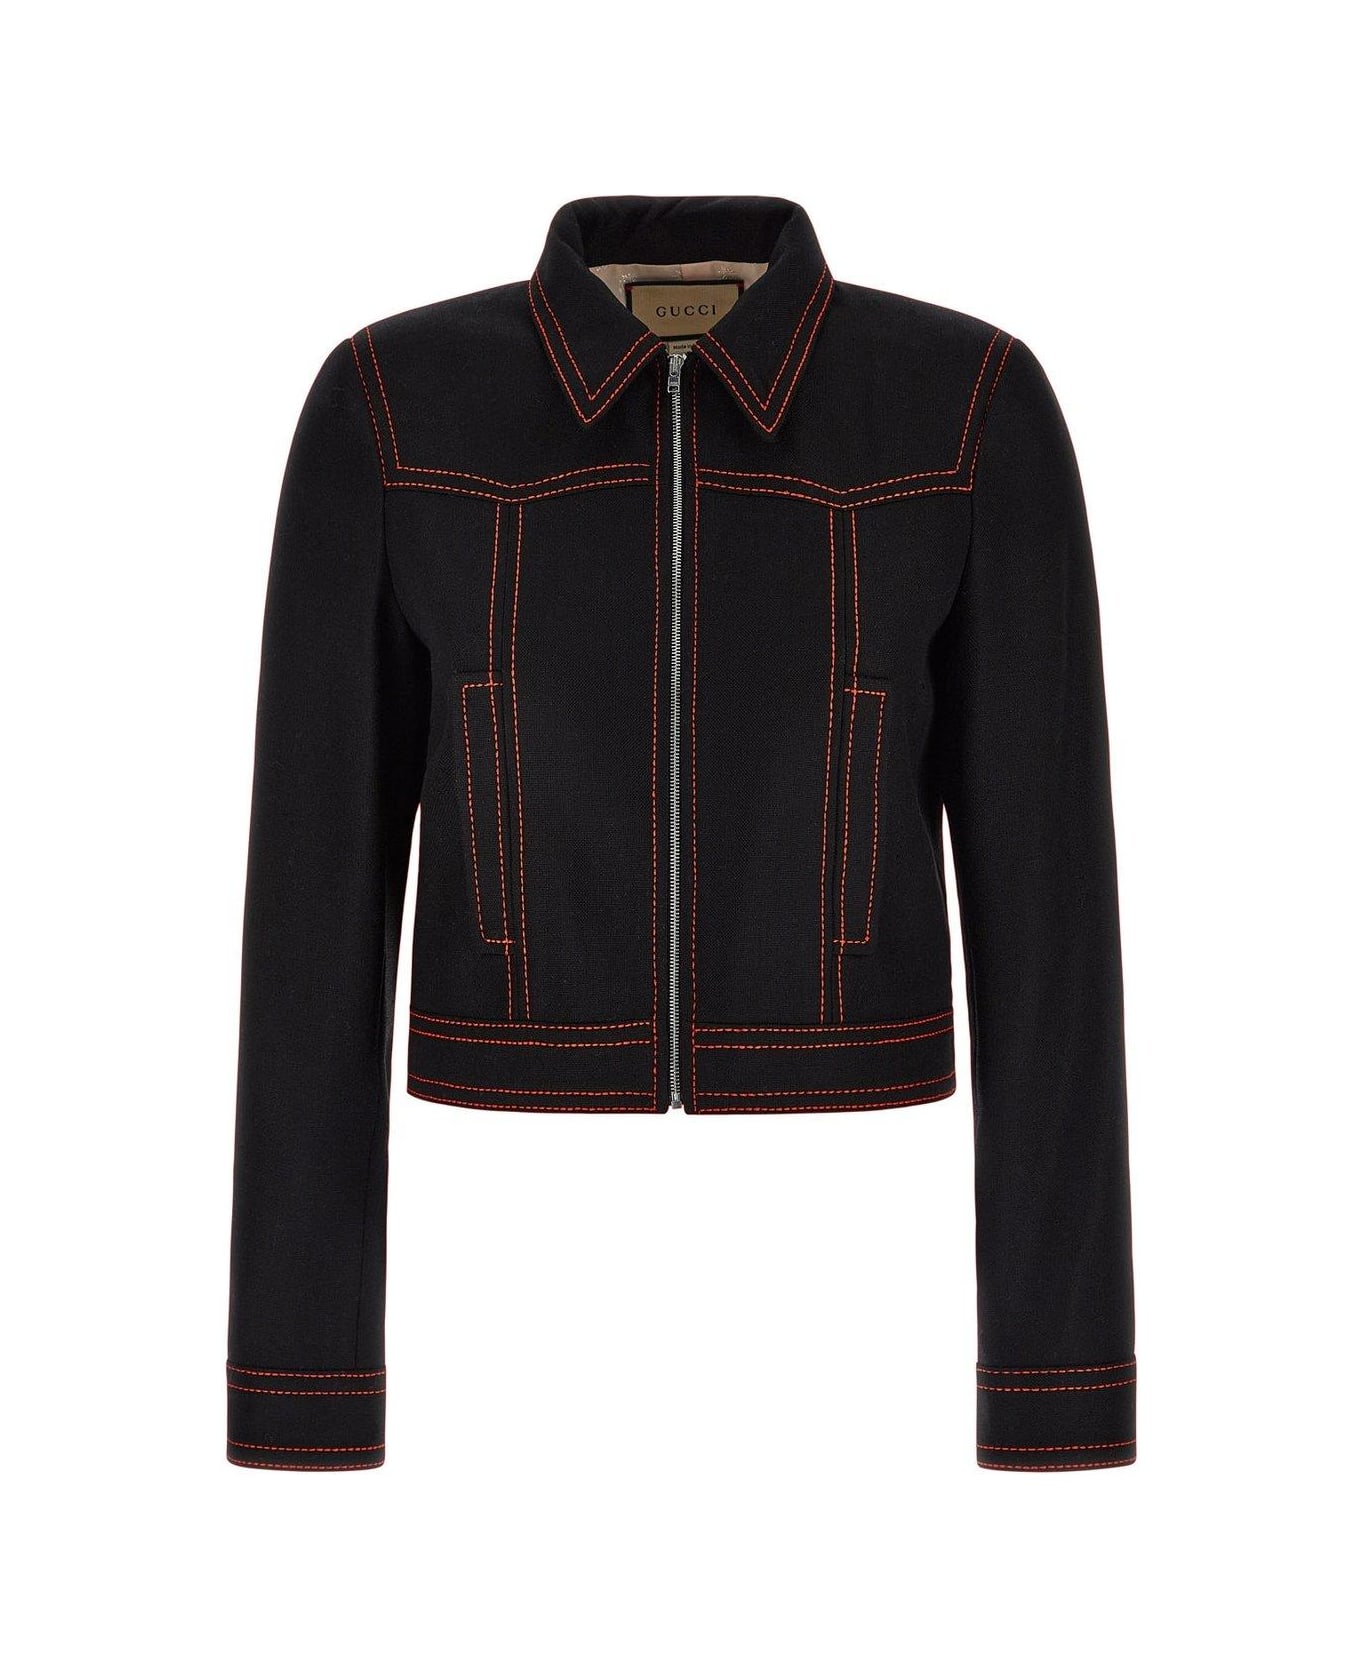 Gucci Top Stitched Long Sleeved Bomber Jacket - Black